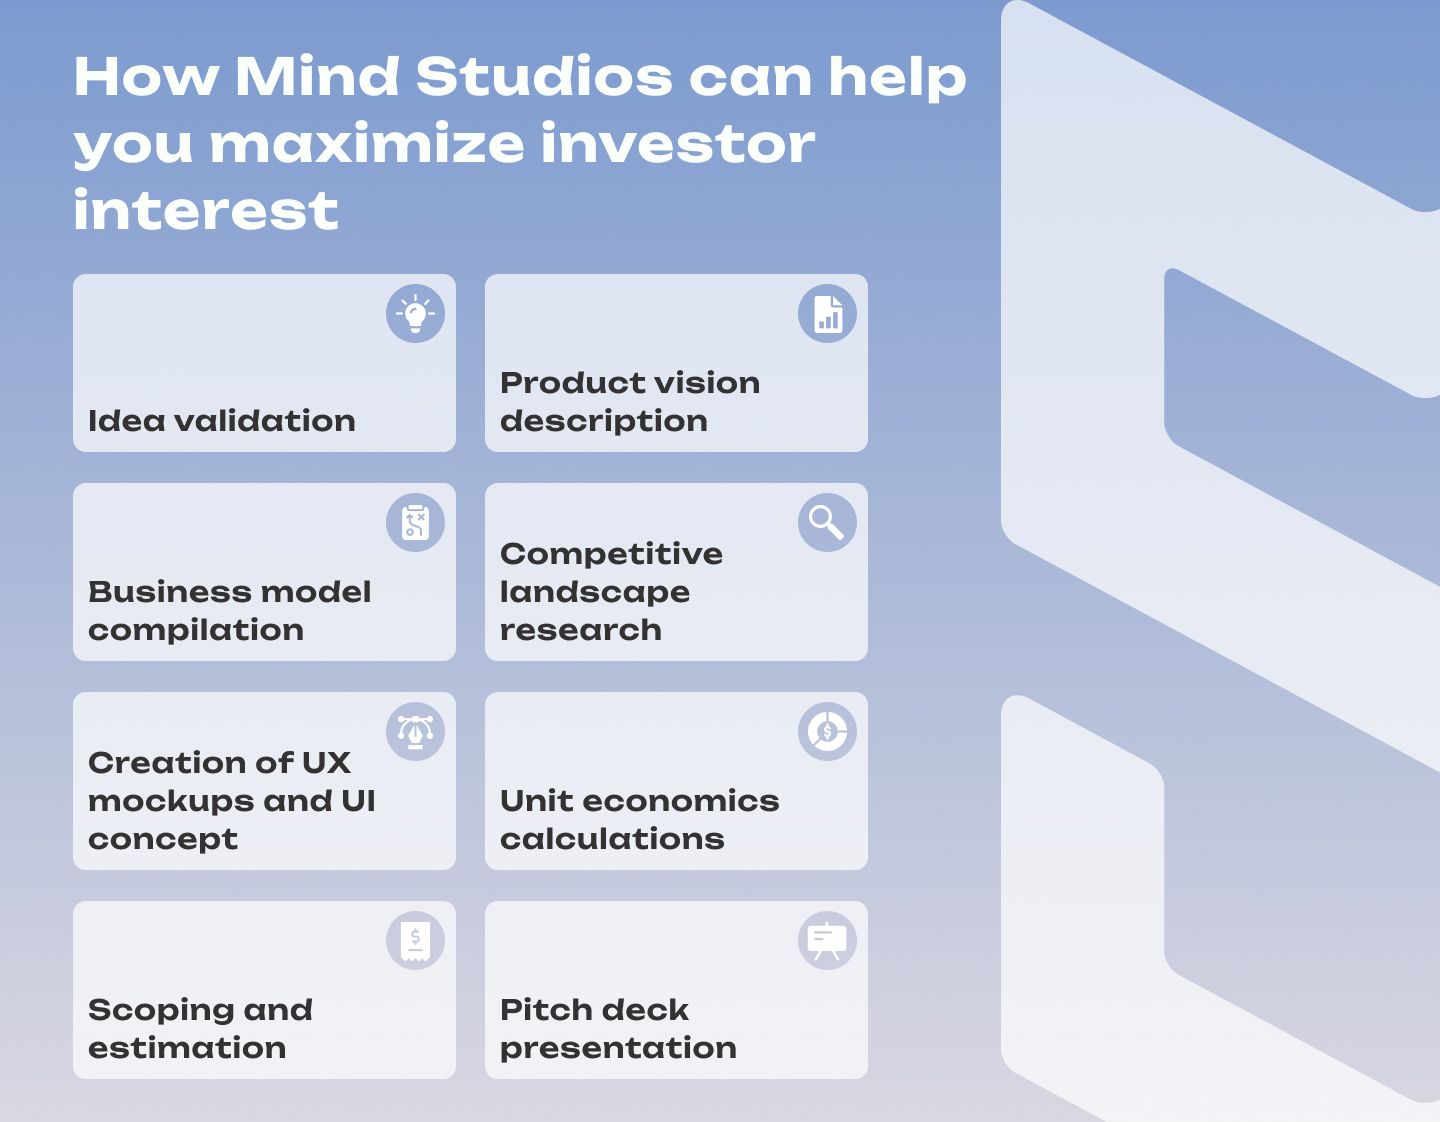 How Mind Studios can help you maximize investor interest